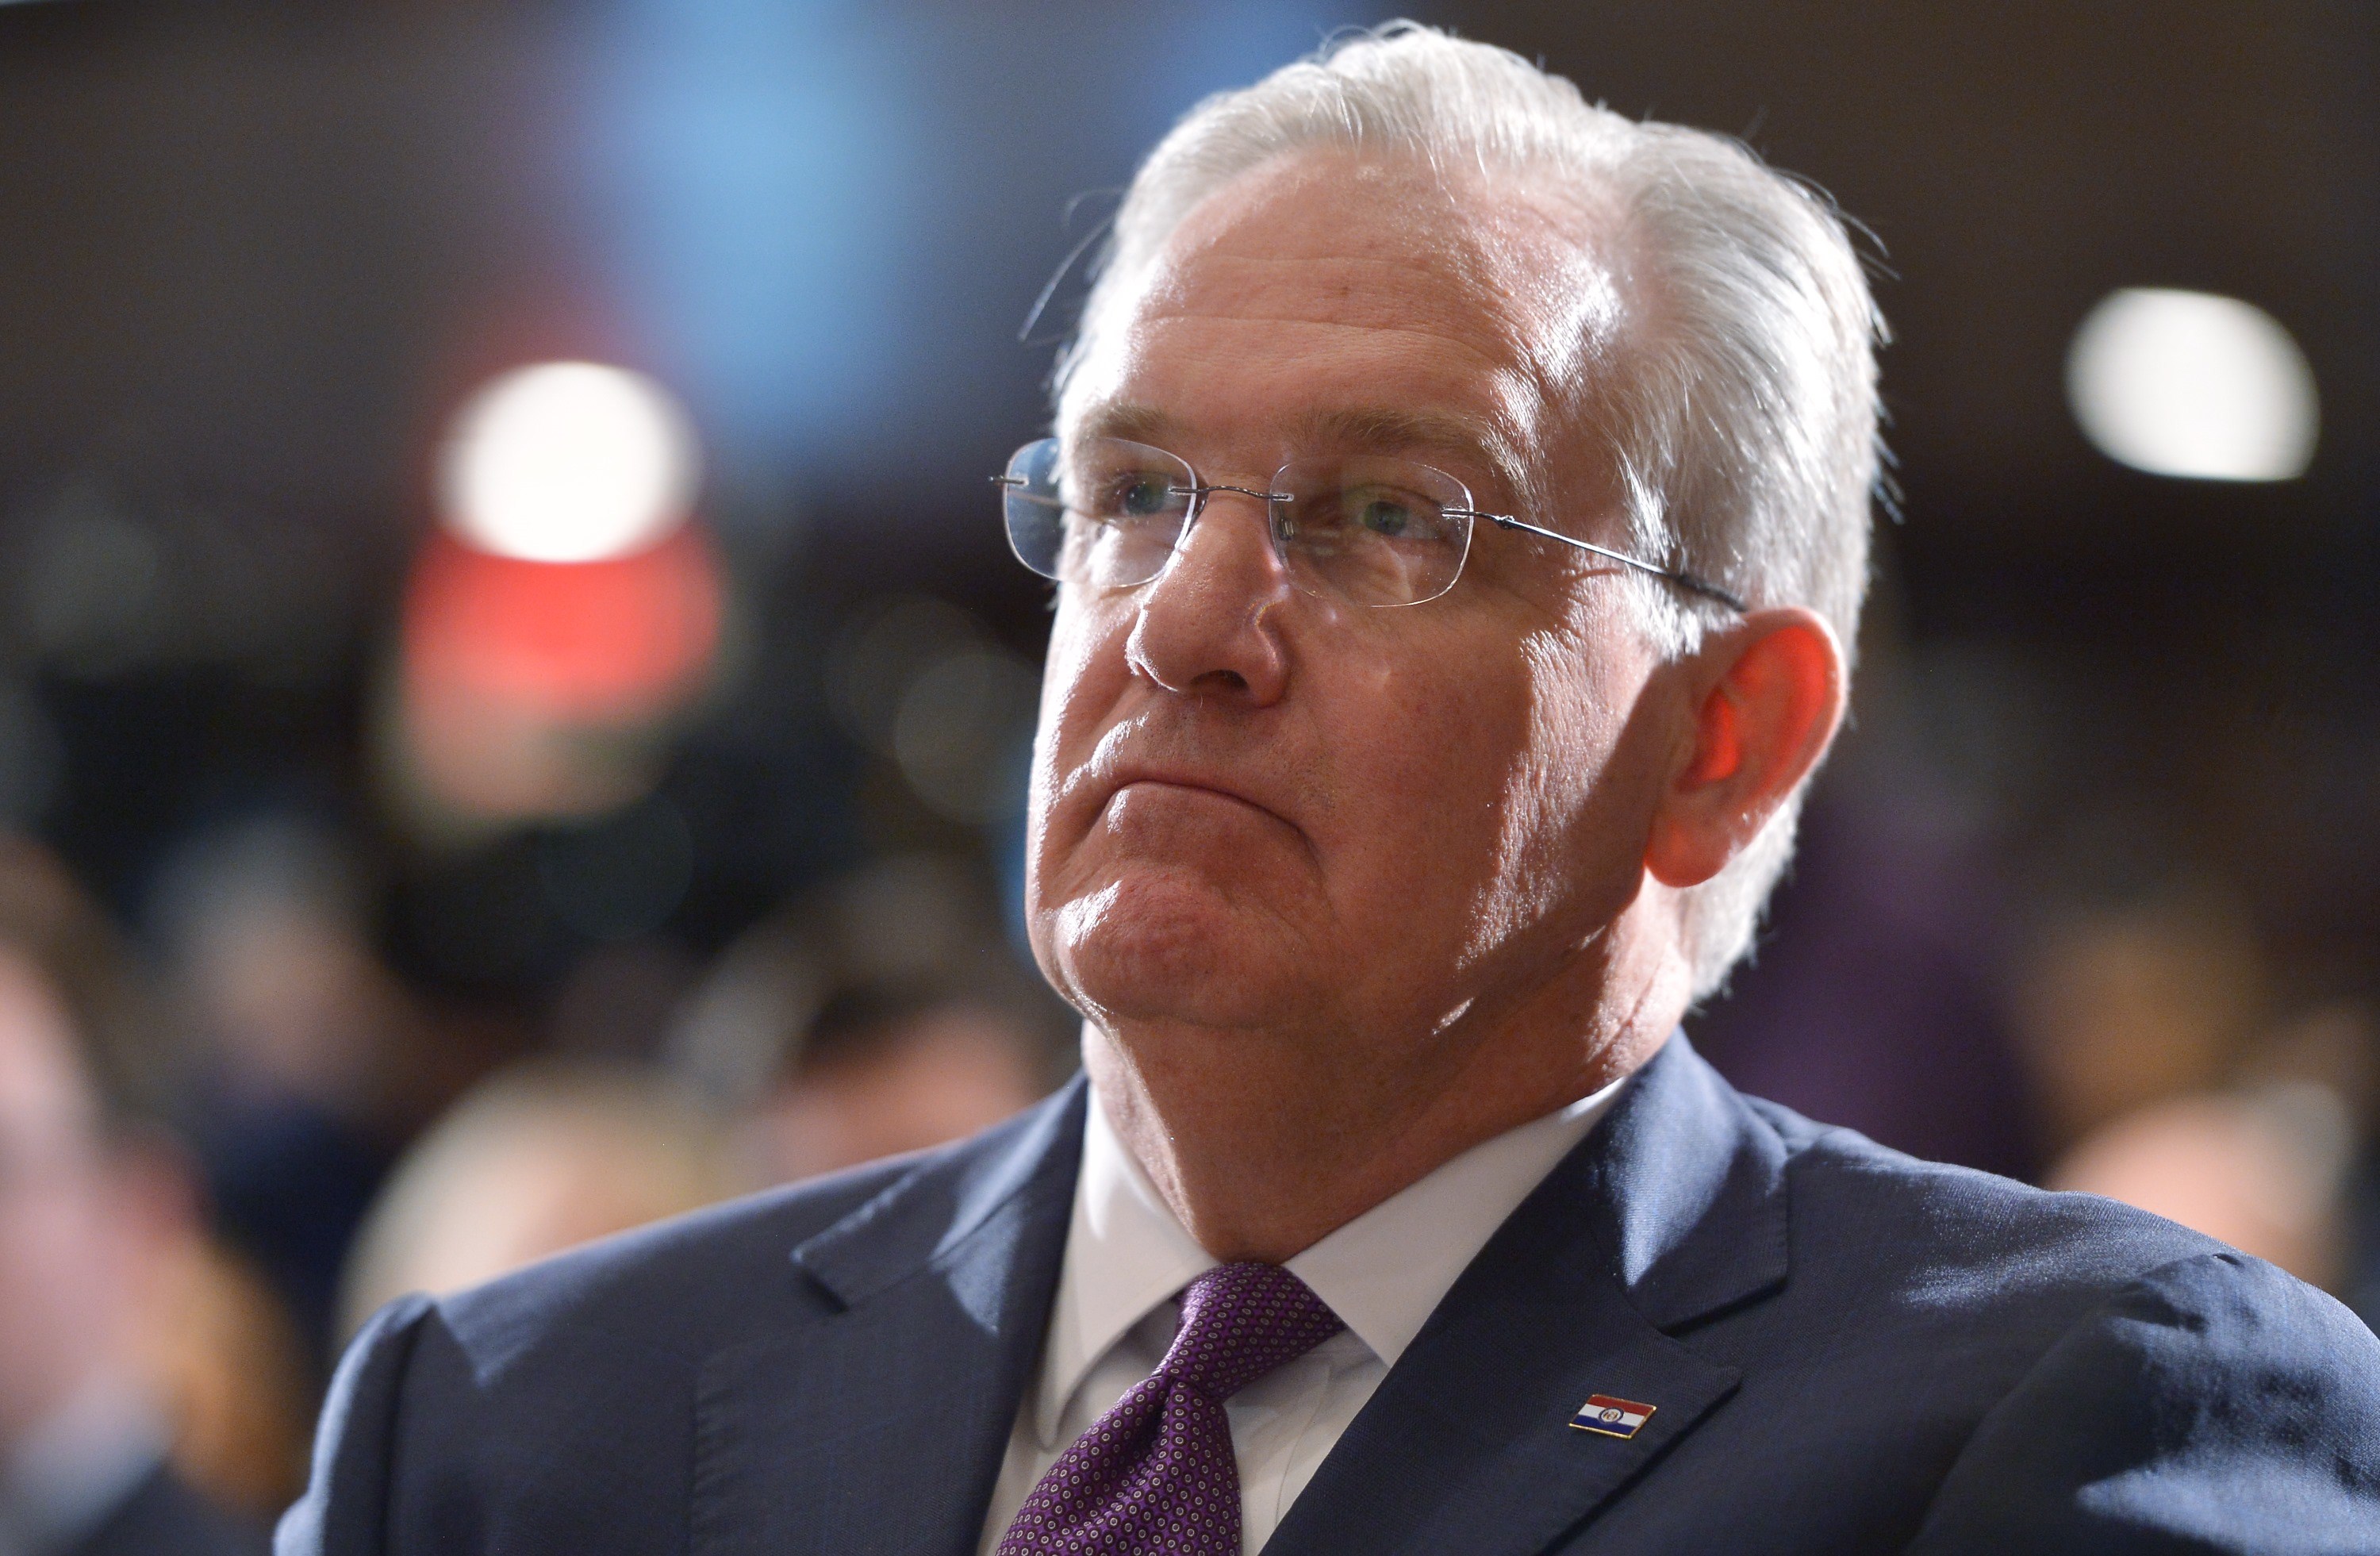 Missouri Gov. Jay Nixon listens to a speaker during the launch of the U.S. Agriculture Coalition for Cuba at the National Press Club on Jan. 8, 2014 in Washington, DC. (Mandel Ngan—AFP/Getty Images)